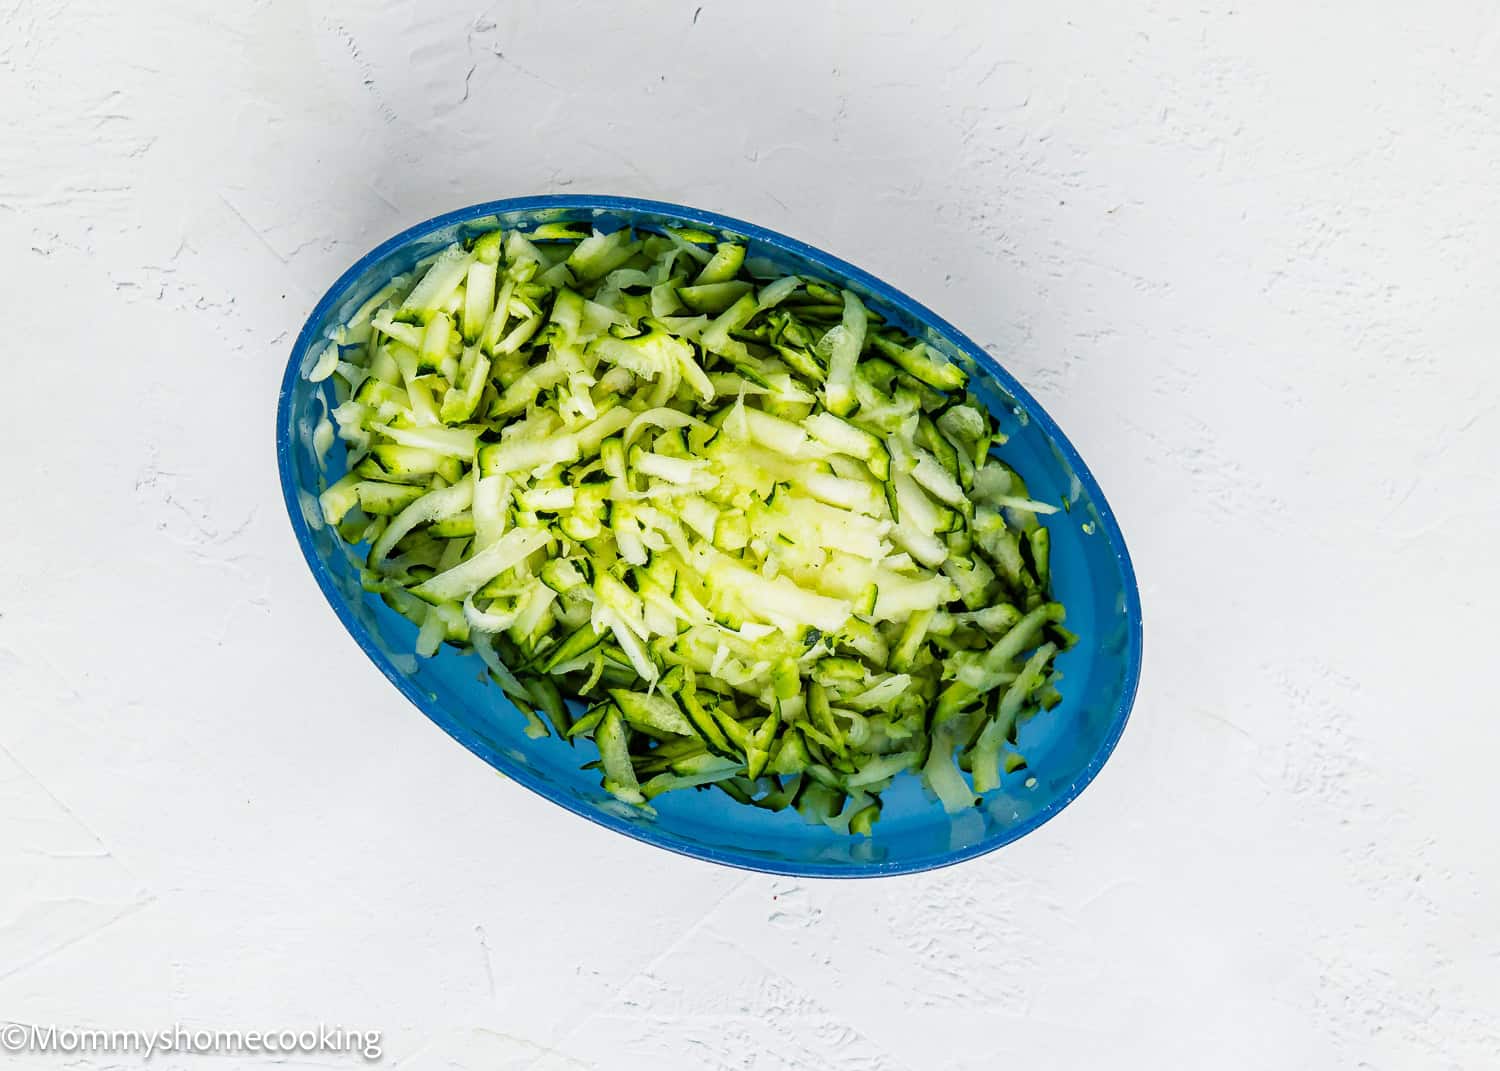 grated zucchini in a blue container.